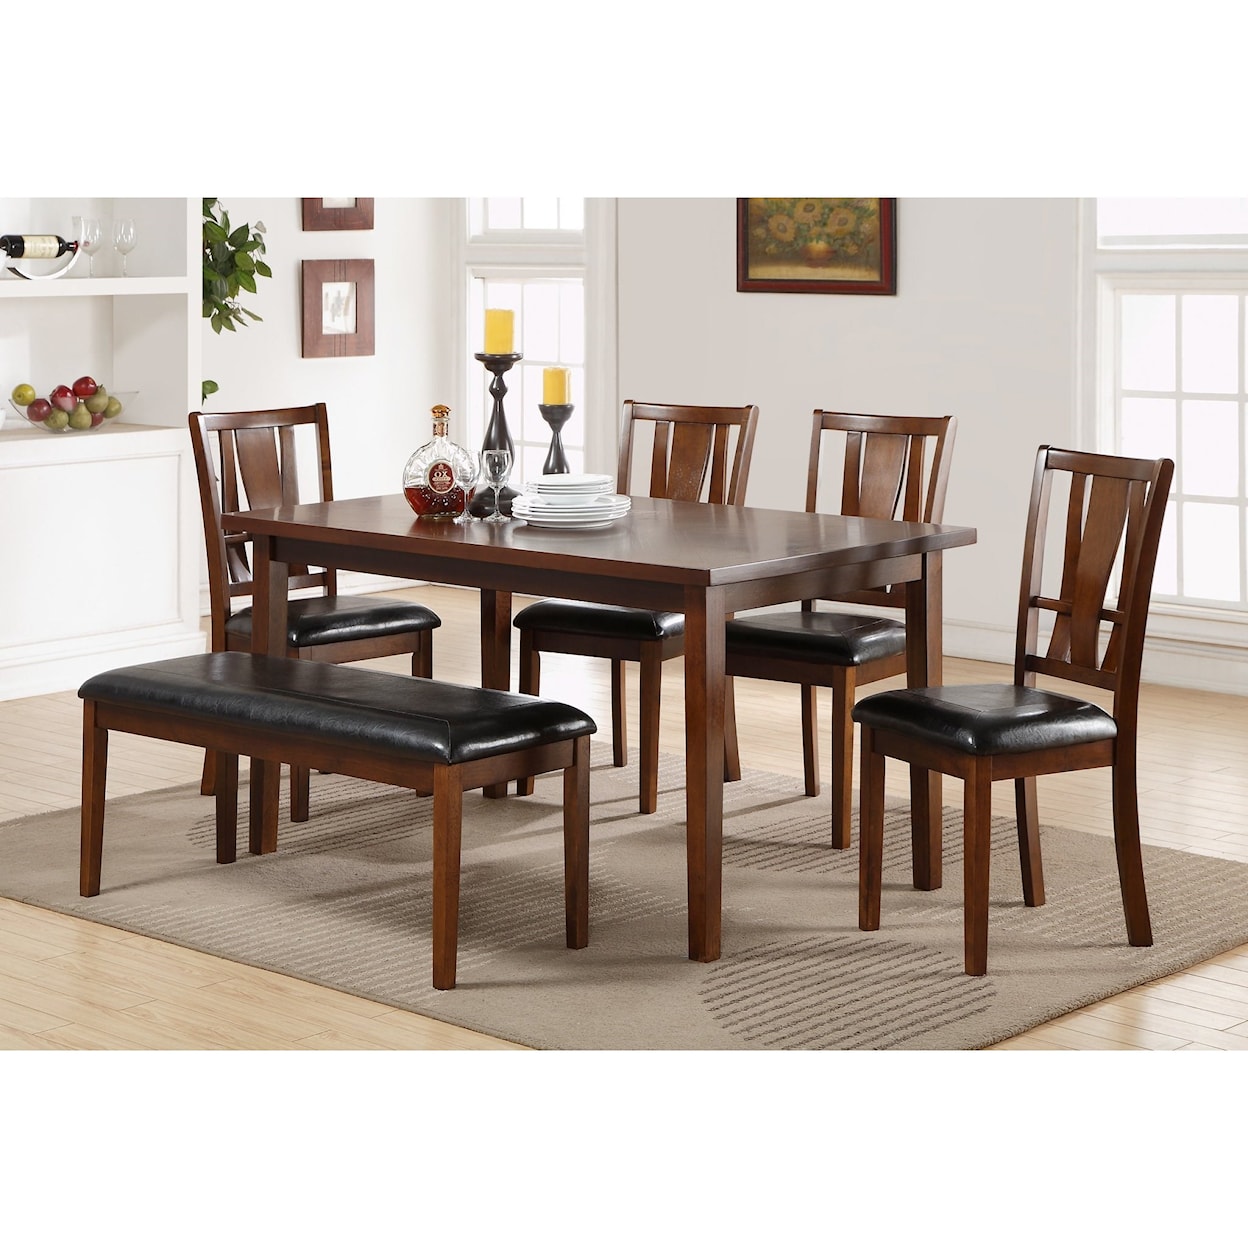 New Classic Dixon Dining Set with Bench